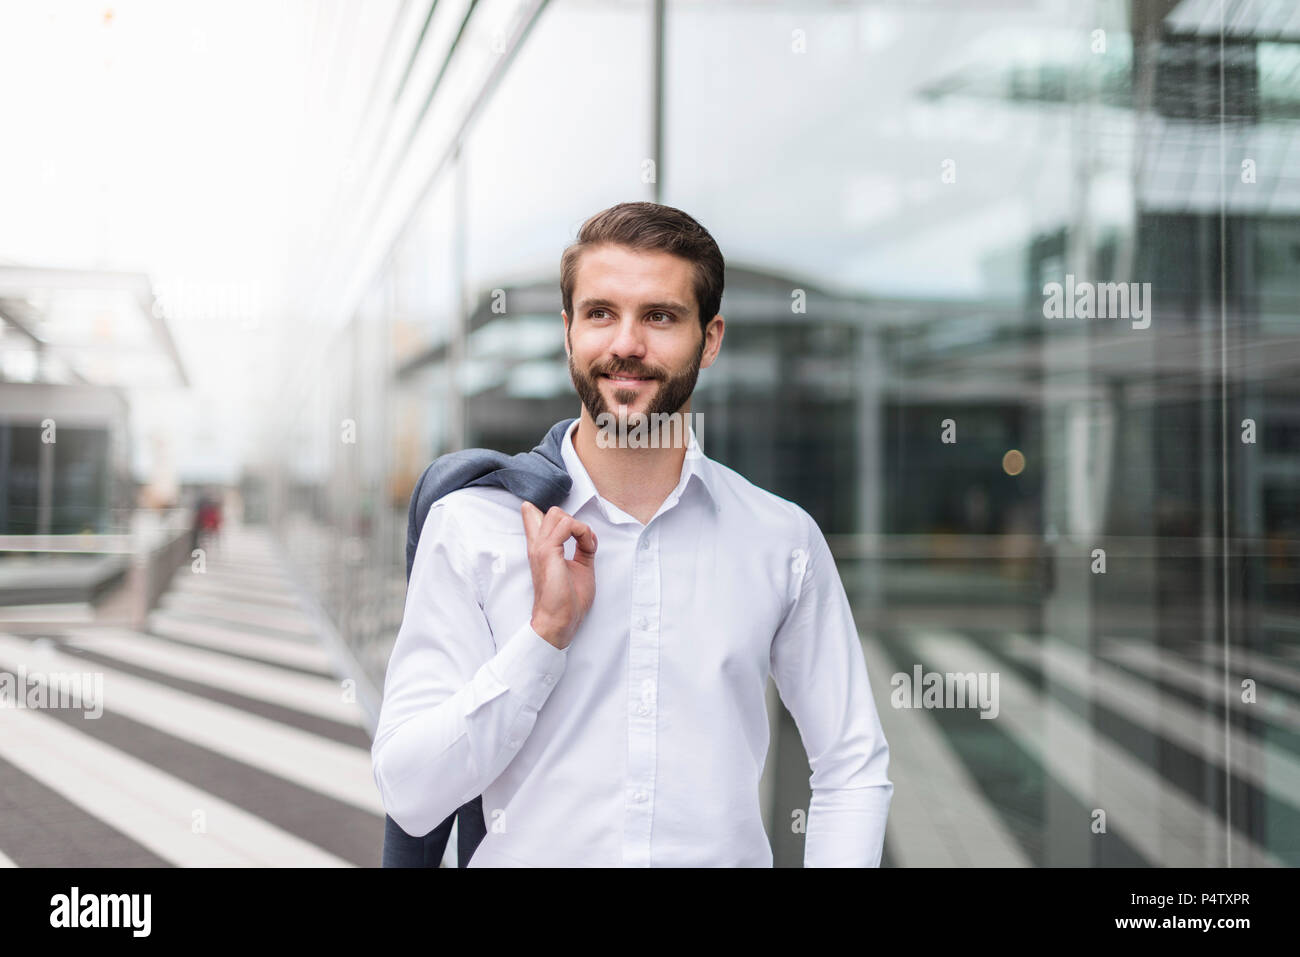 Portrait of smiling young businessman at glass facade Stock Photo